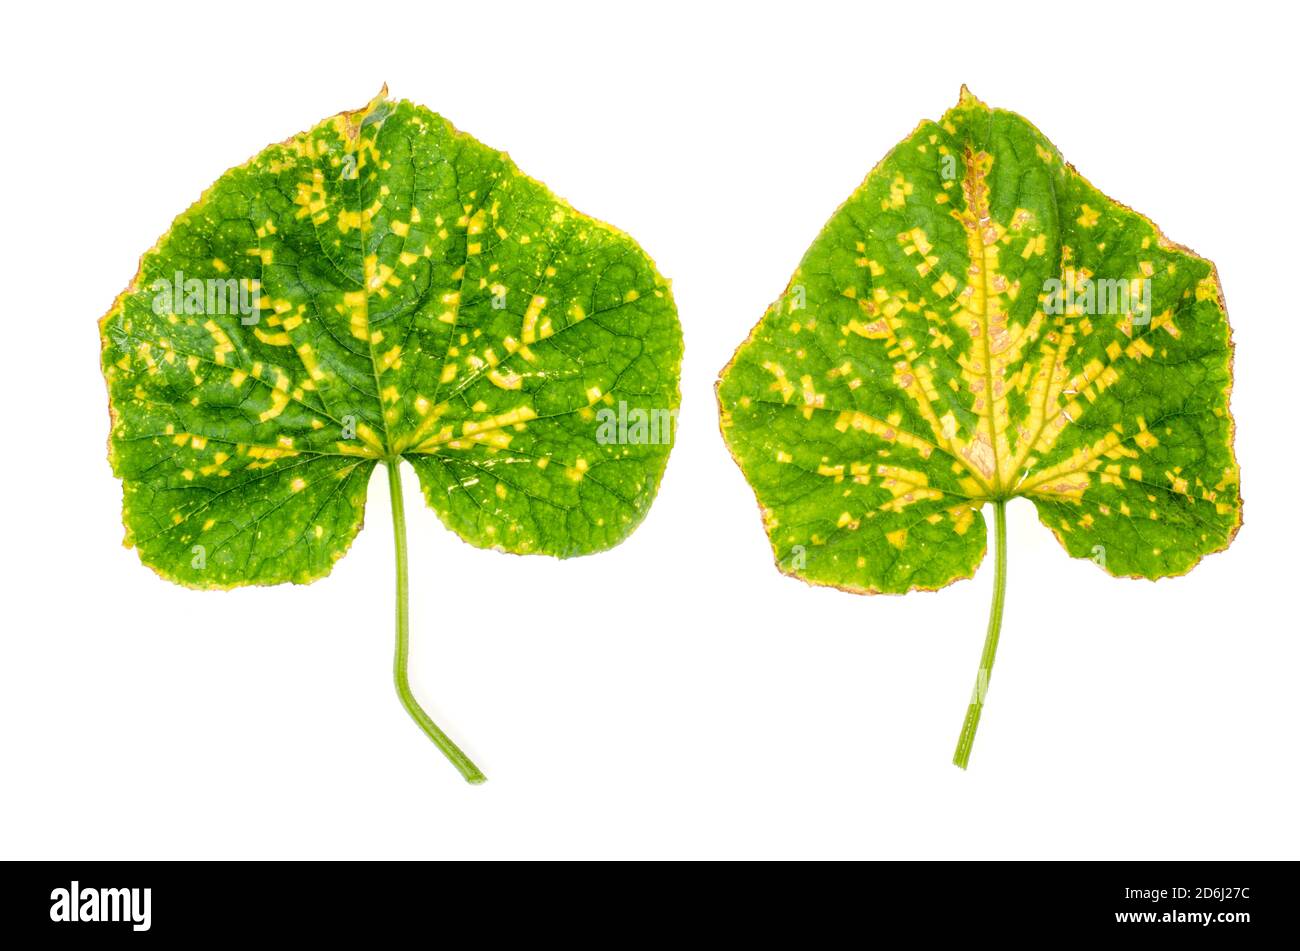 Green cucumber leaf damaged by diseases and pests. Studio Photo Stock Photo